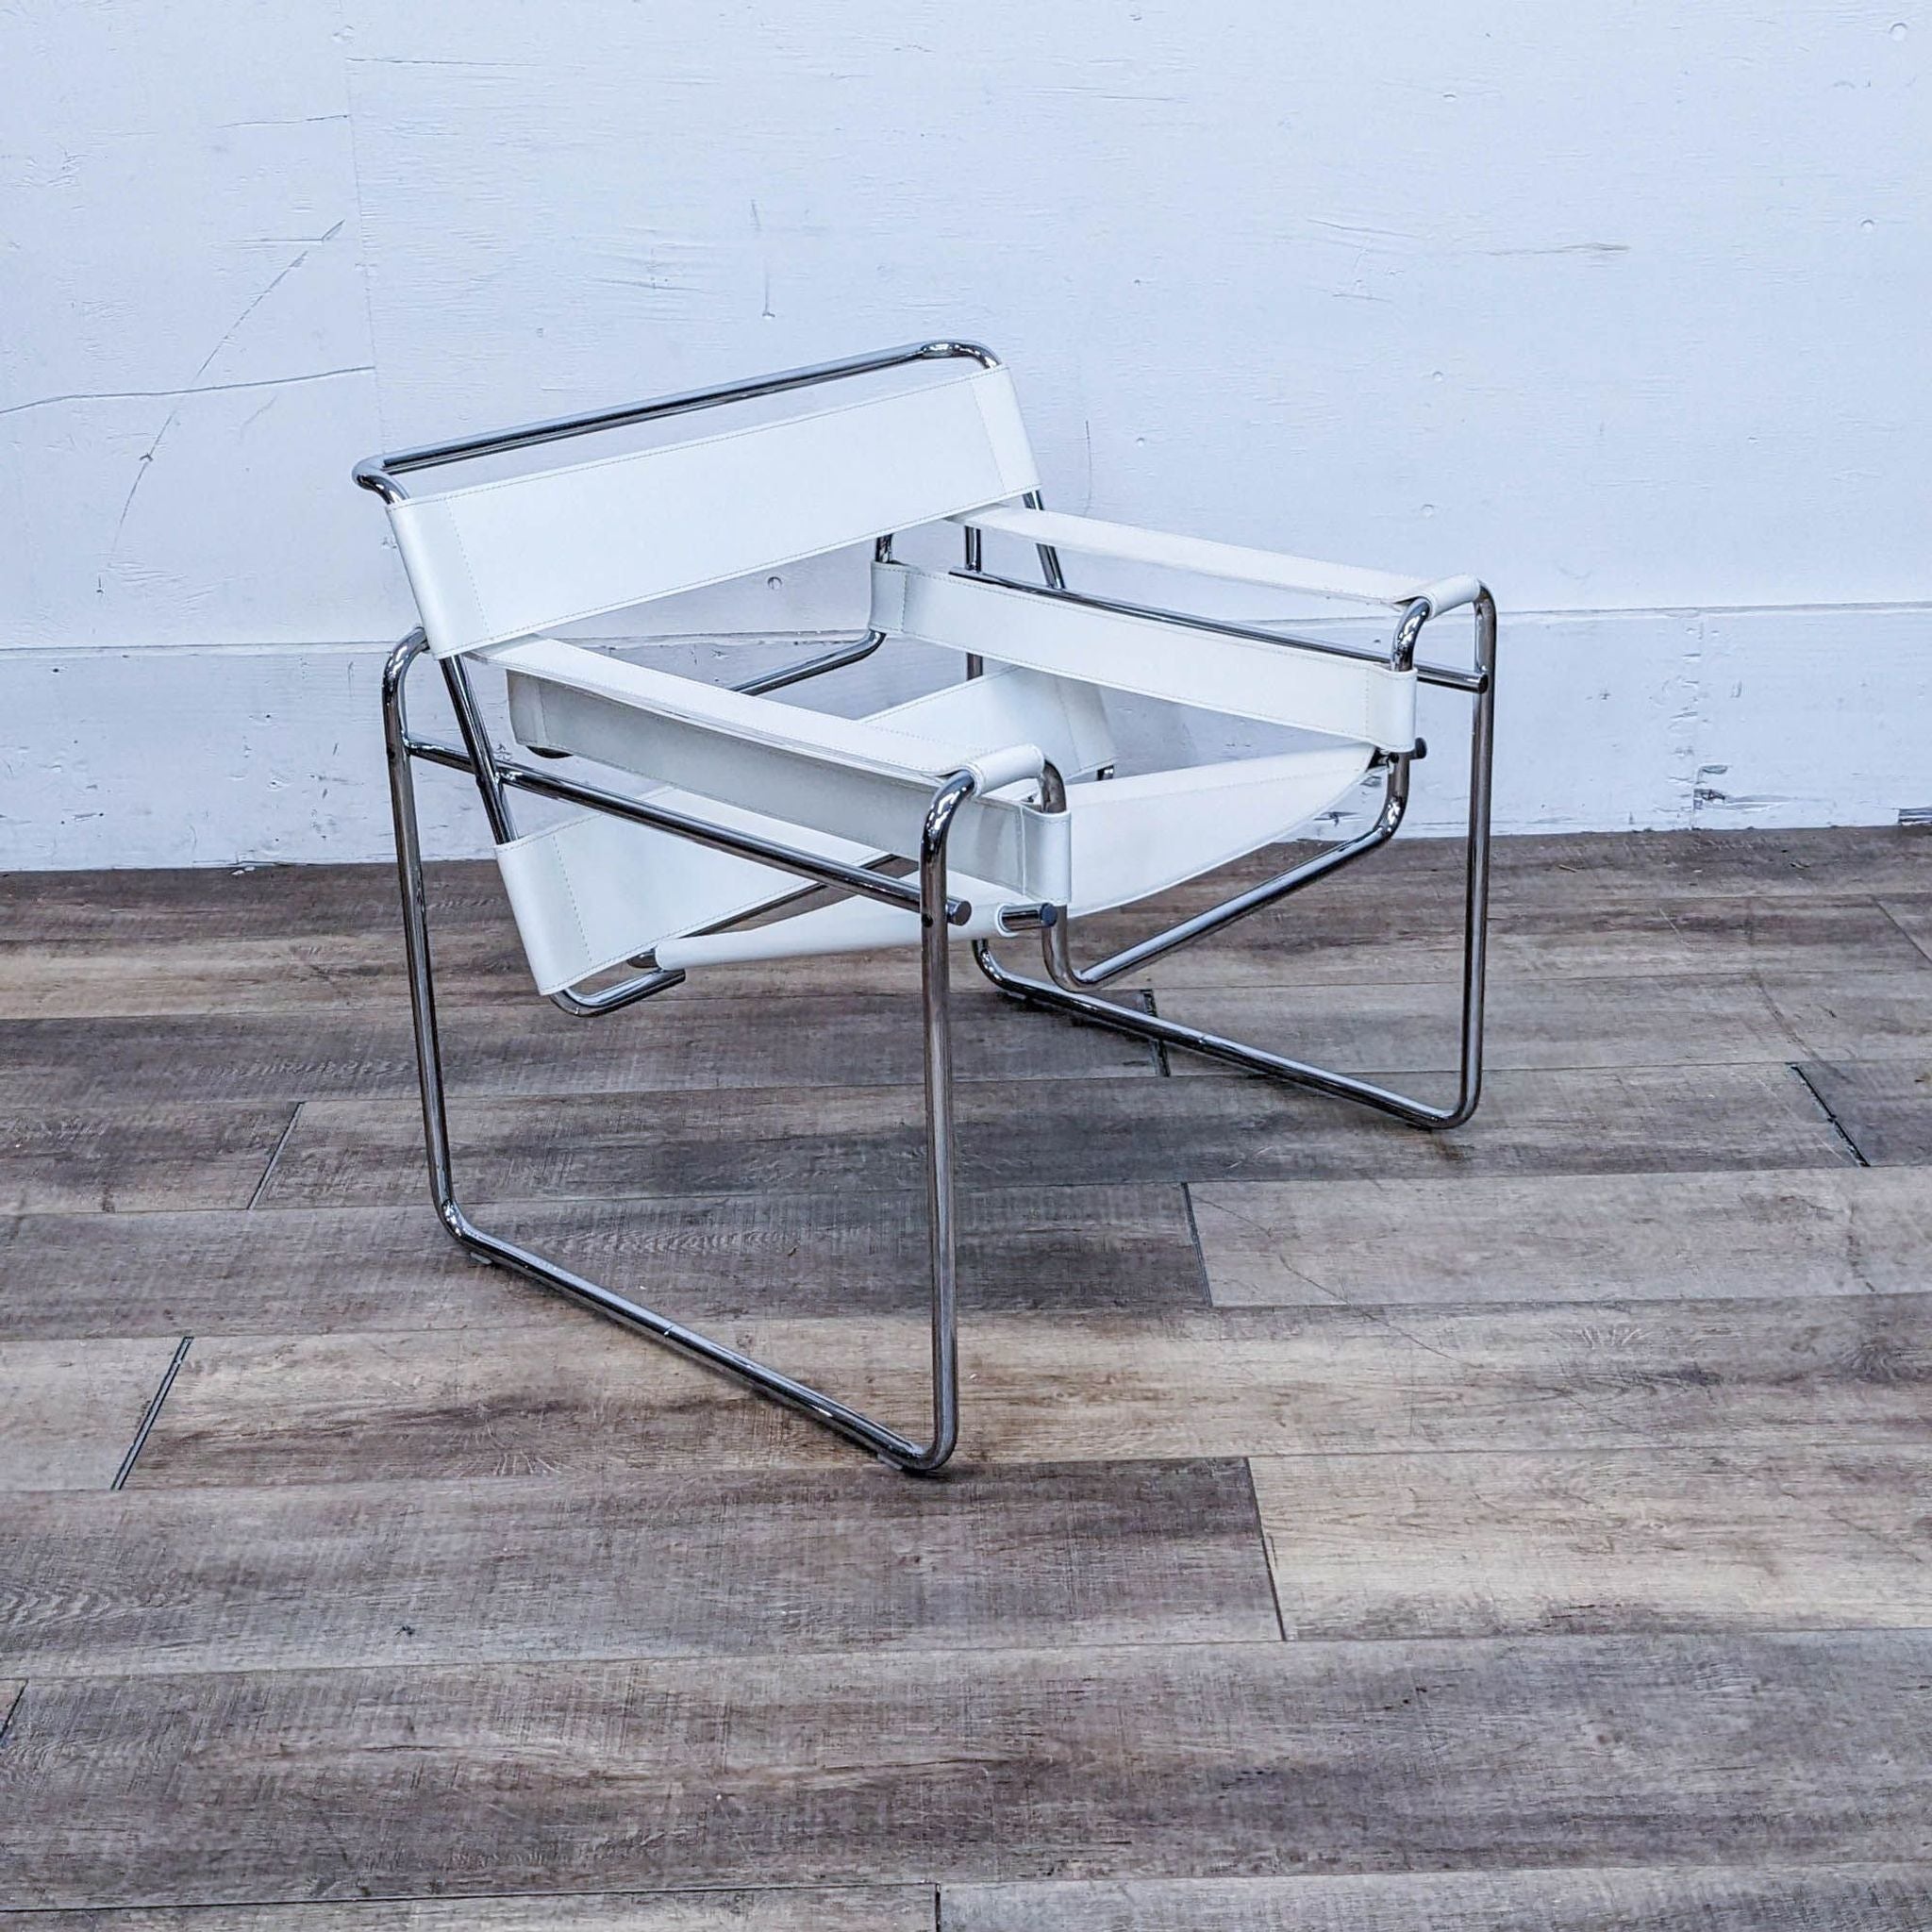 Knoll lounge chair with white leather and chrome frame, angled view on wooden floor against a white wall.